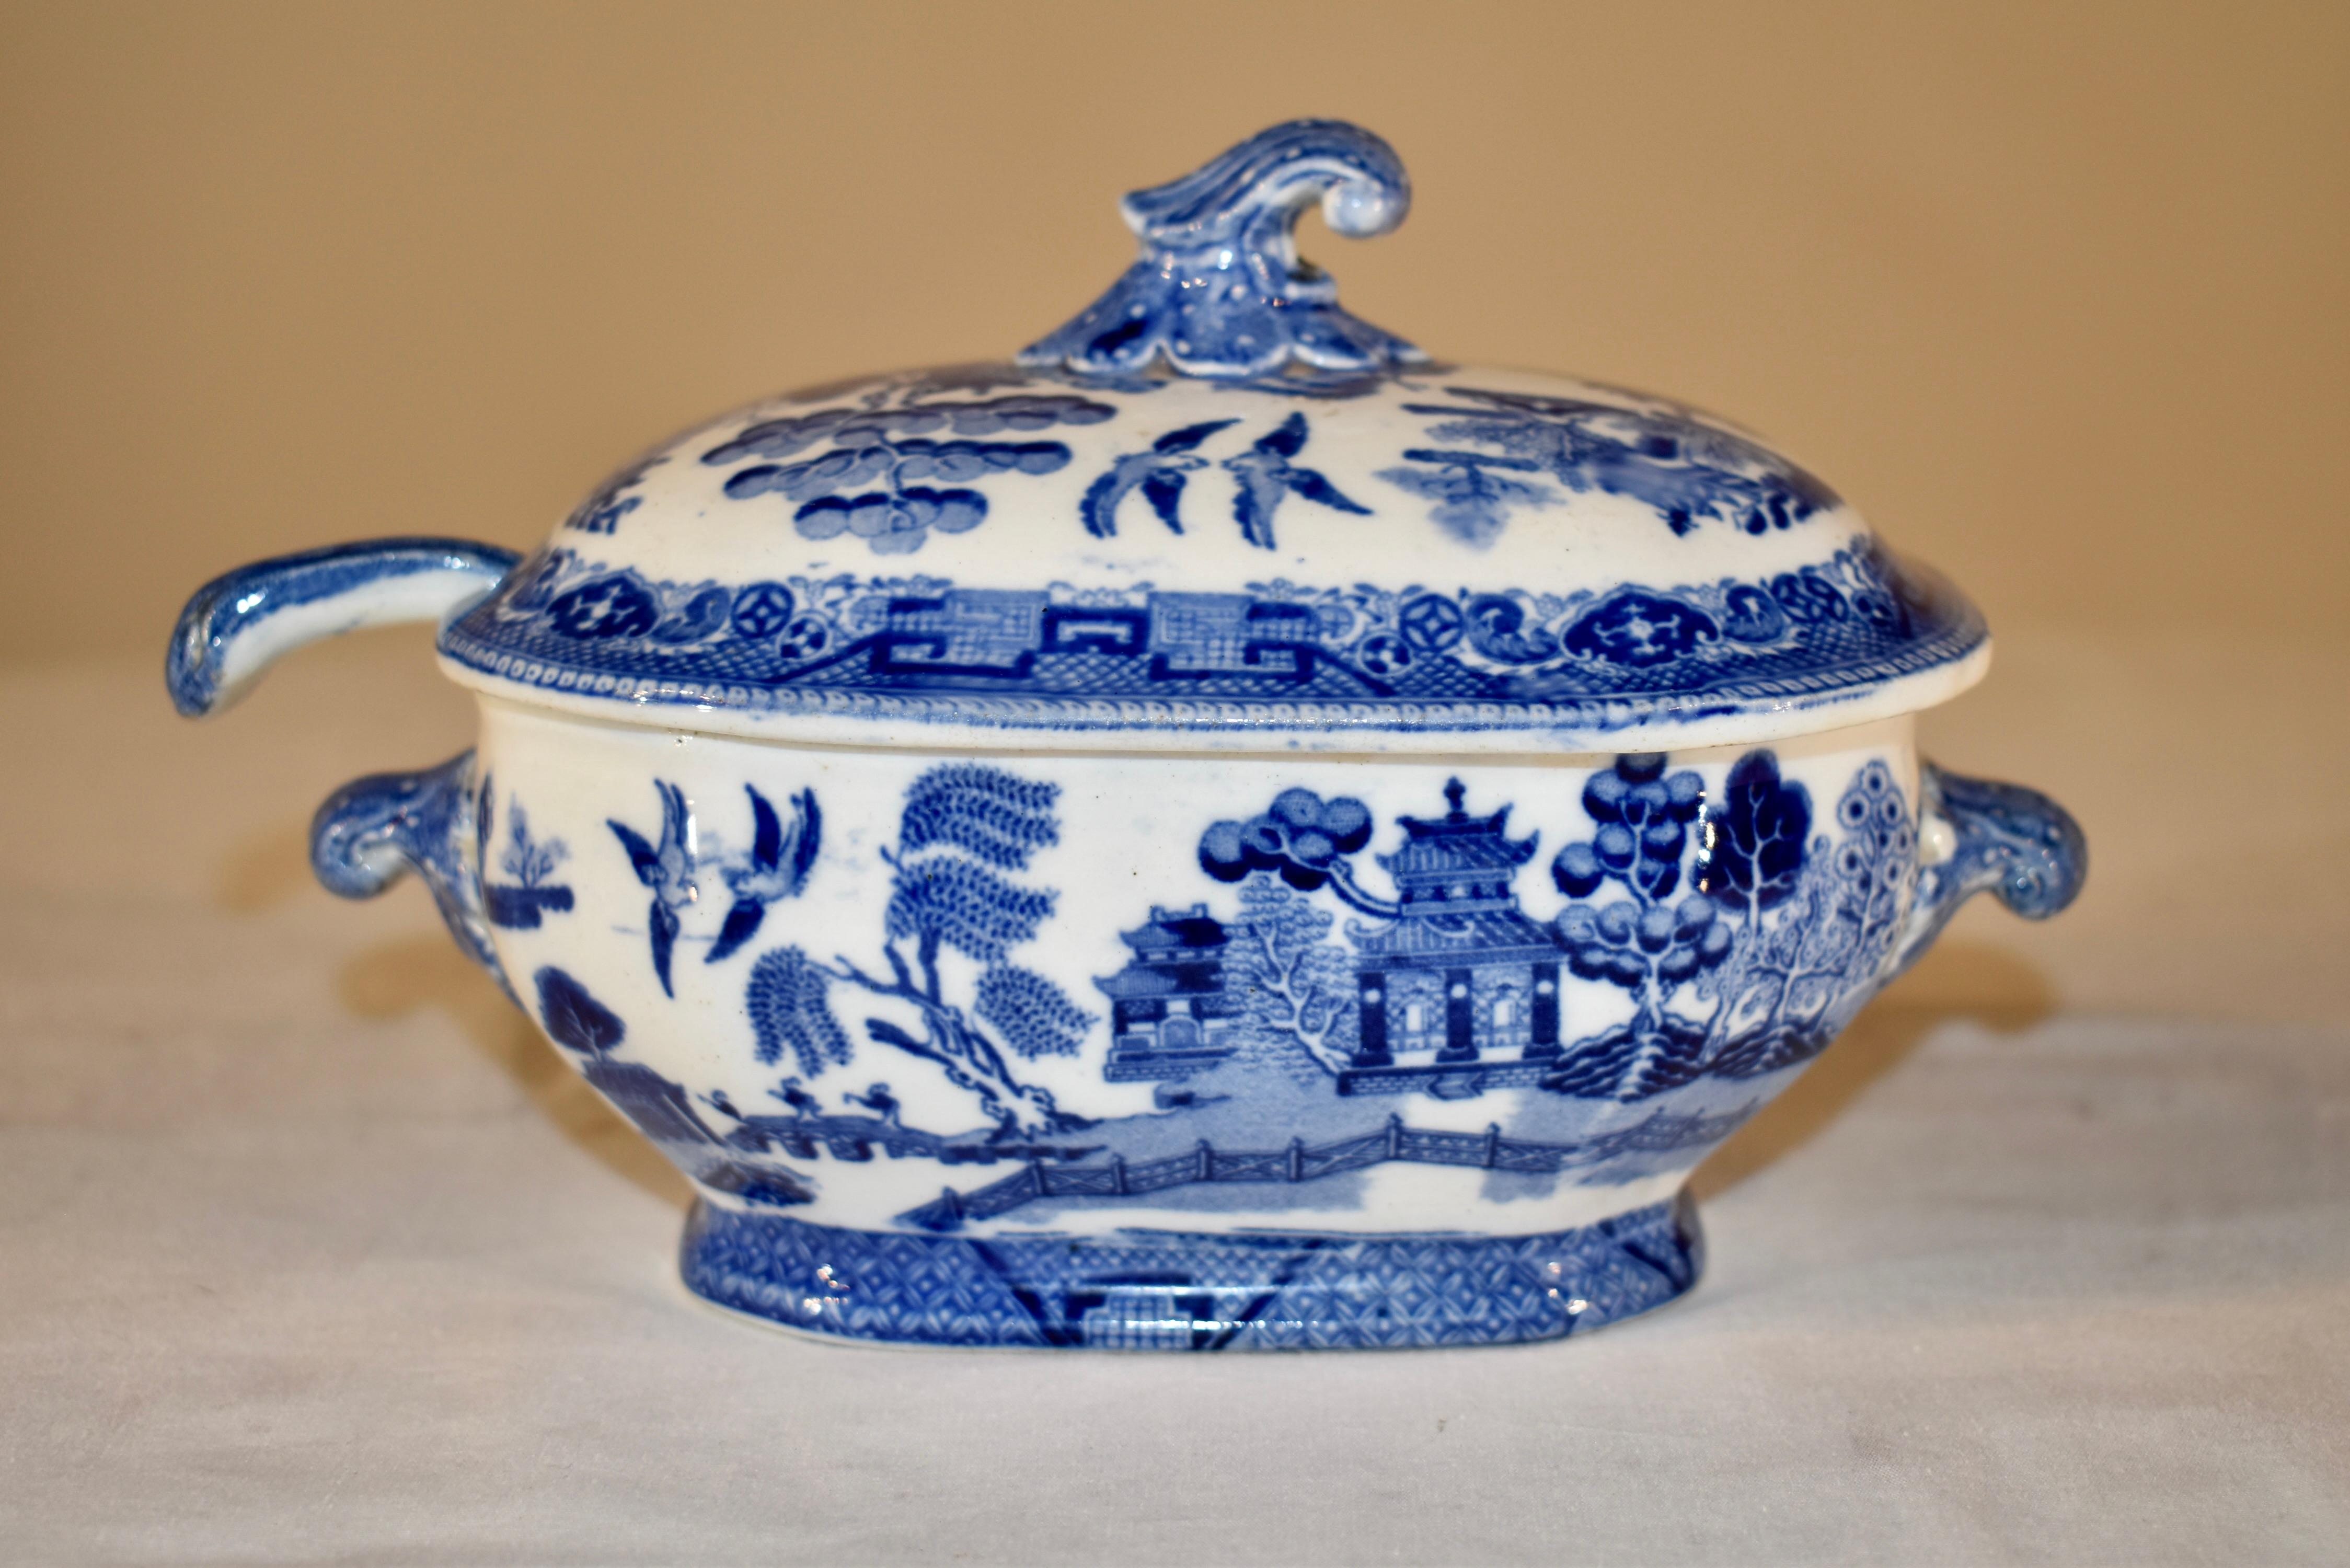 19th Century Blue Willow Sauce Tureen and Ladle In Good Condition For Sale In High Point, NC